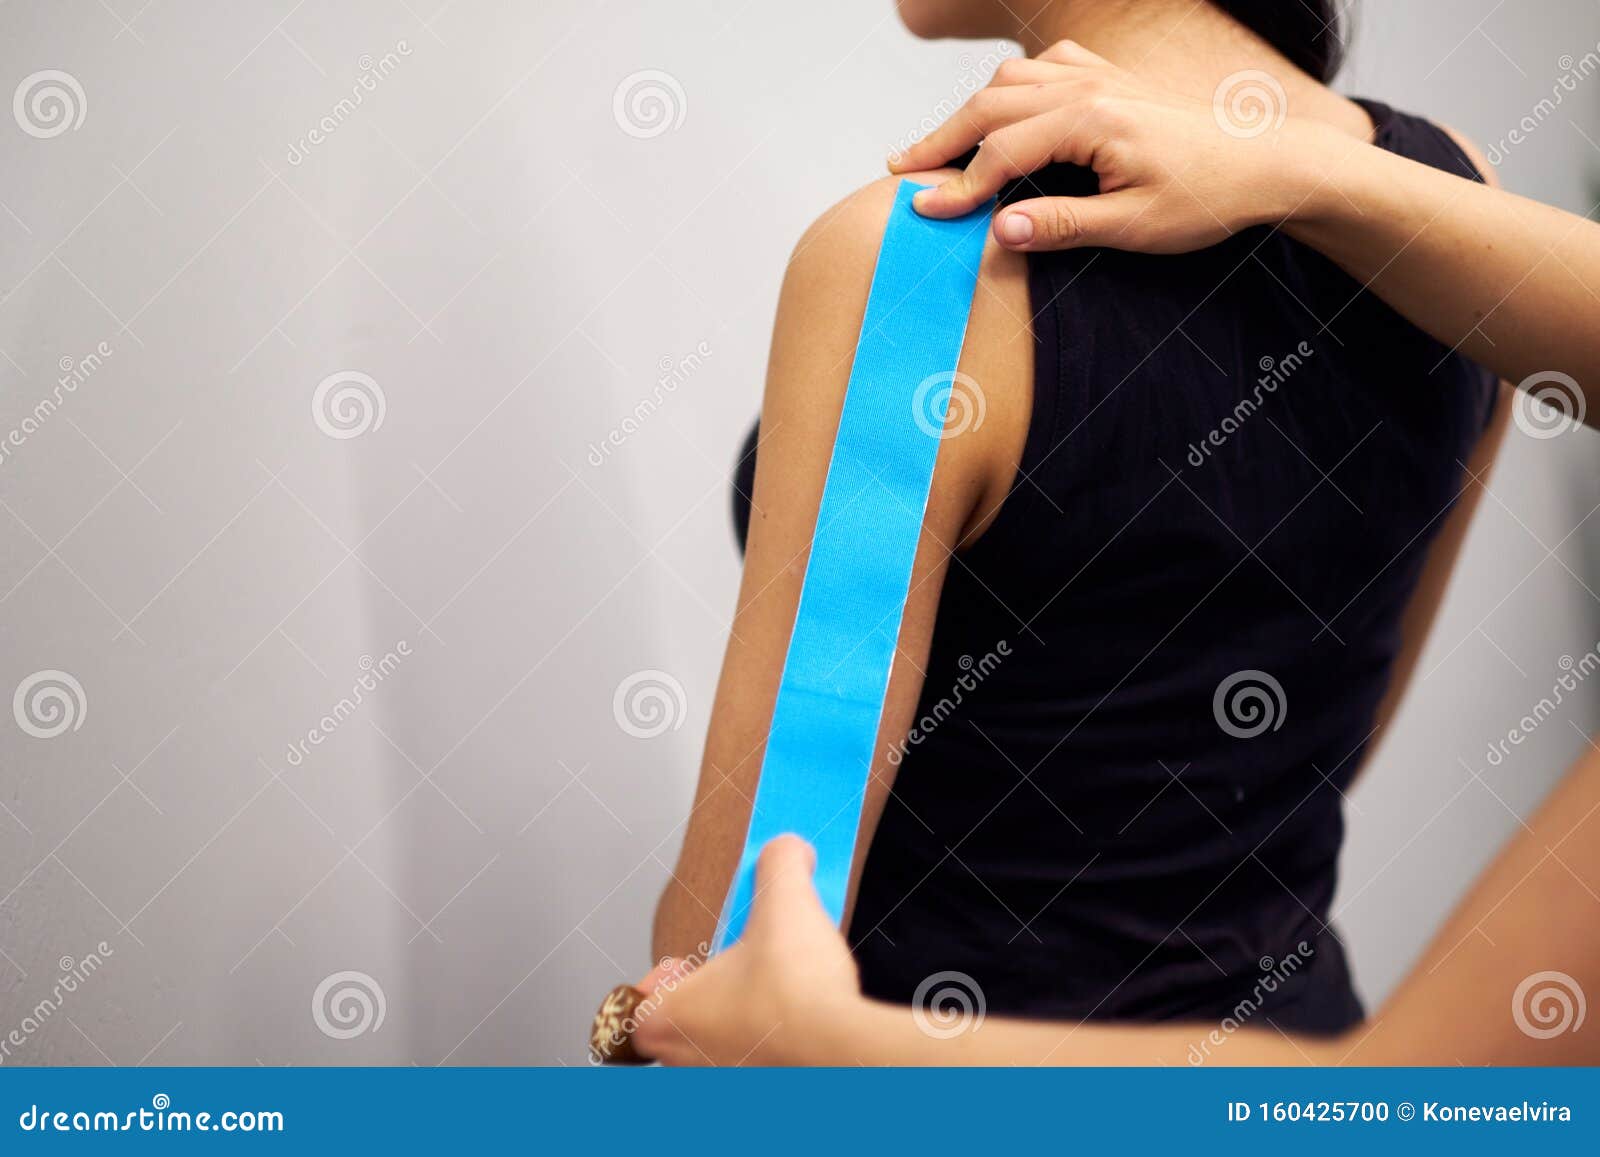 Kinesiology Taping Treatment with Blue Tape on Female Patient Injured Arm. Sports Injury Kinesio Treatment Stock Photo - Image of 160425700